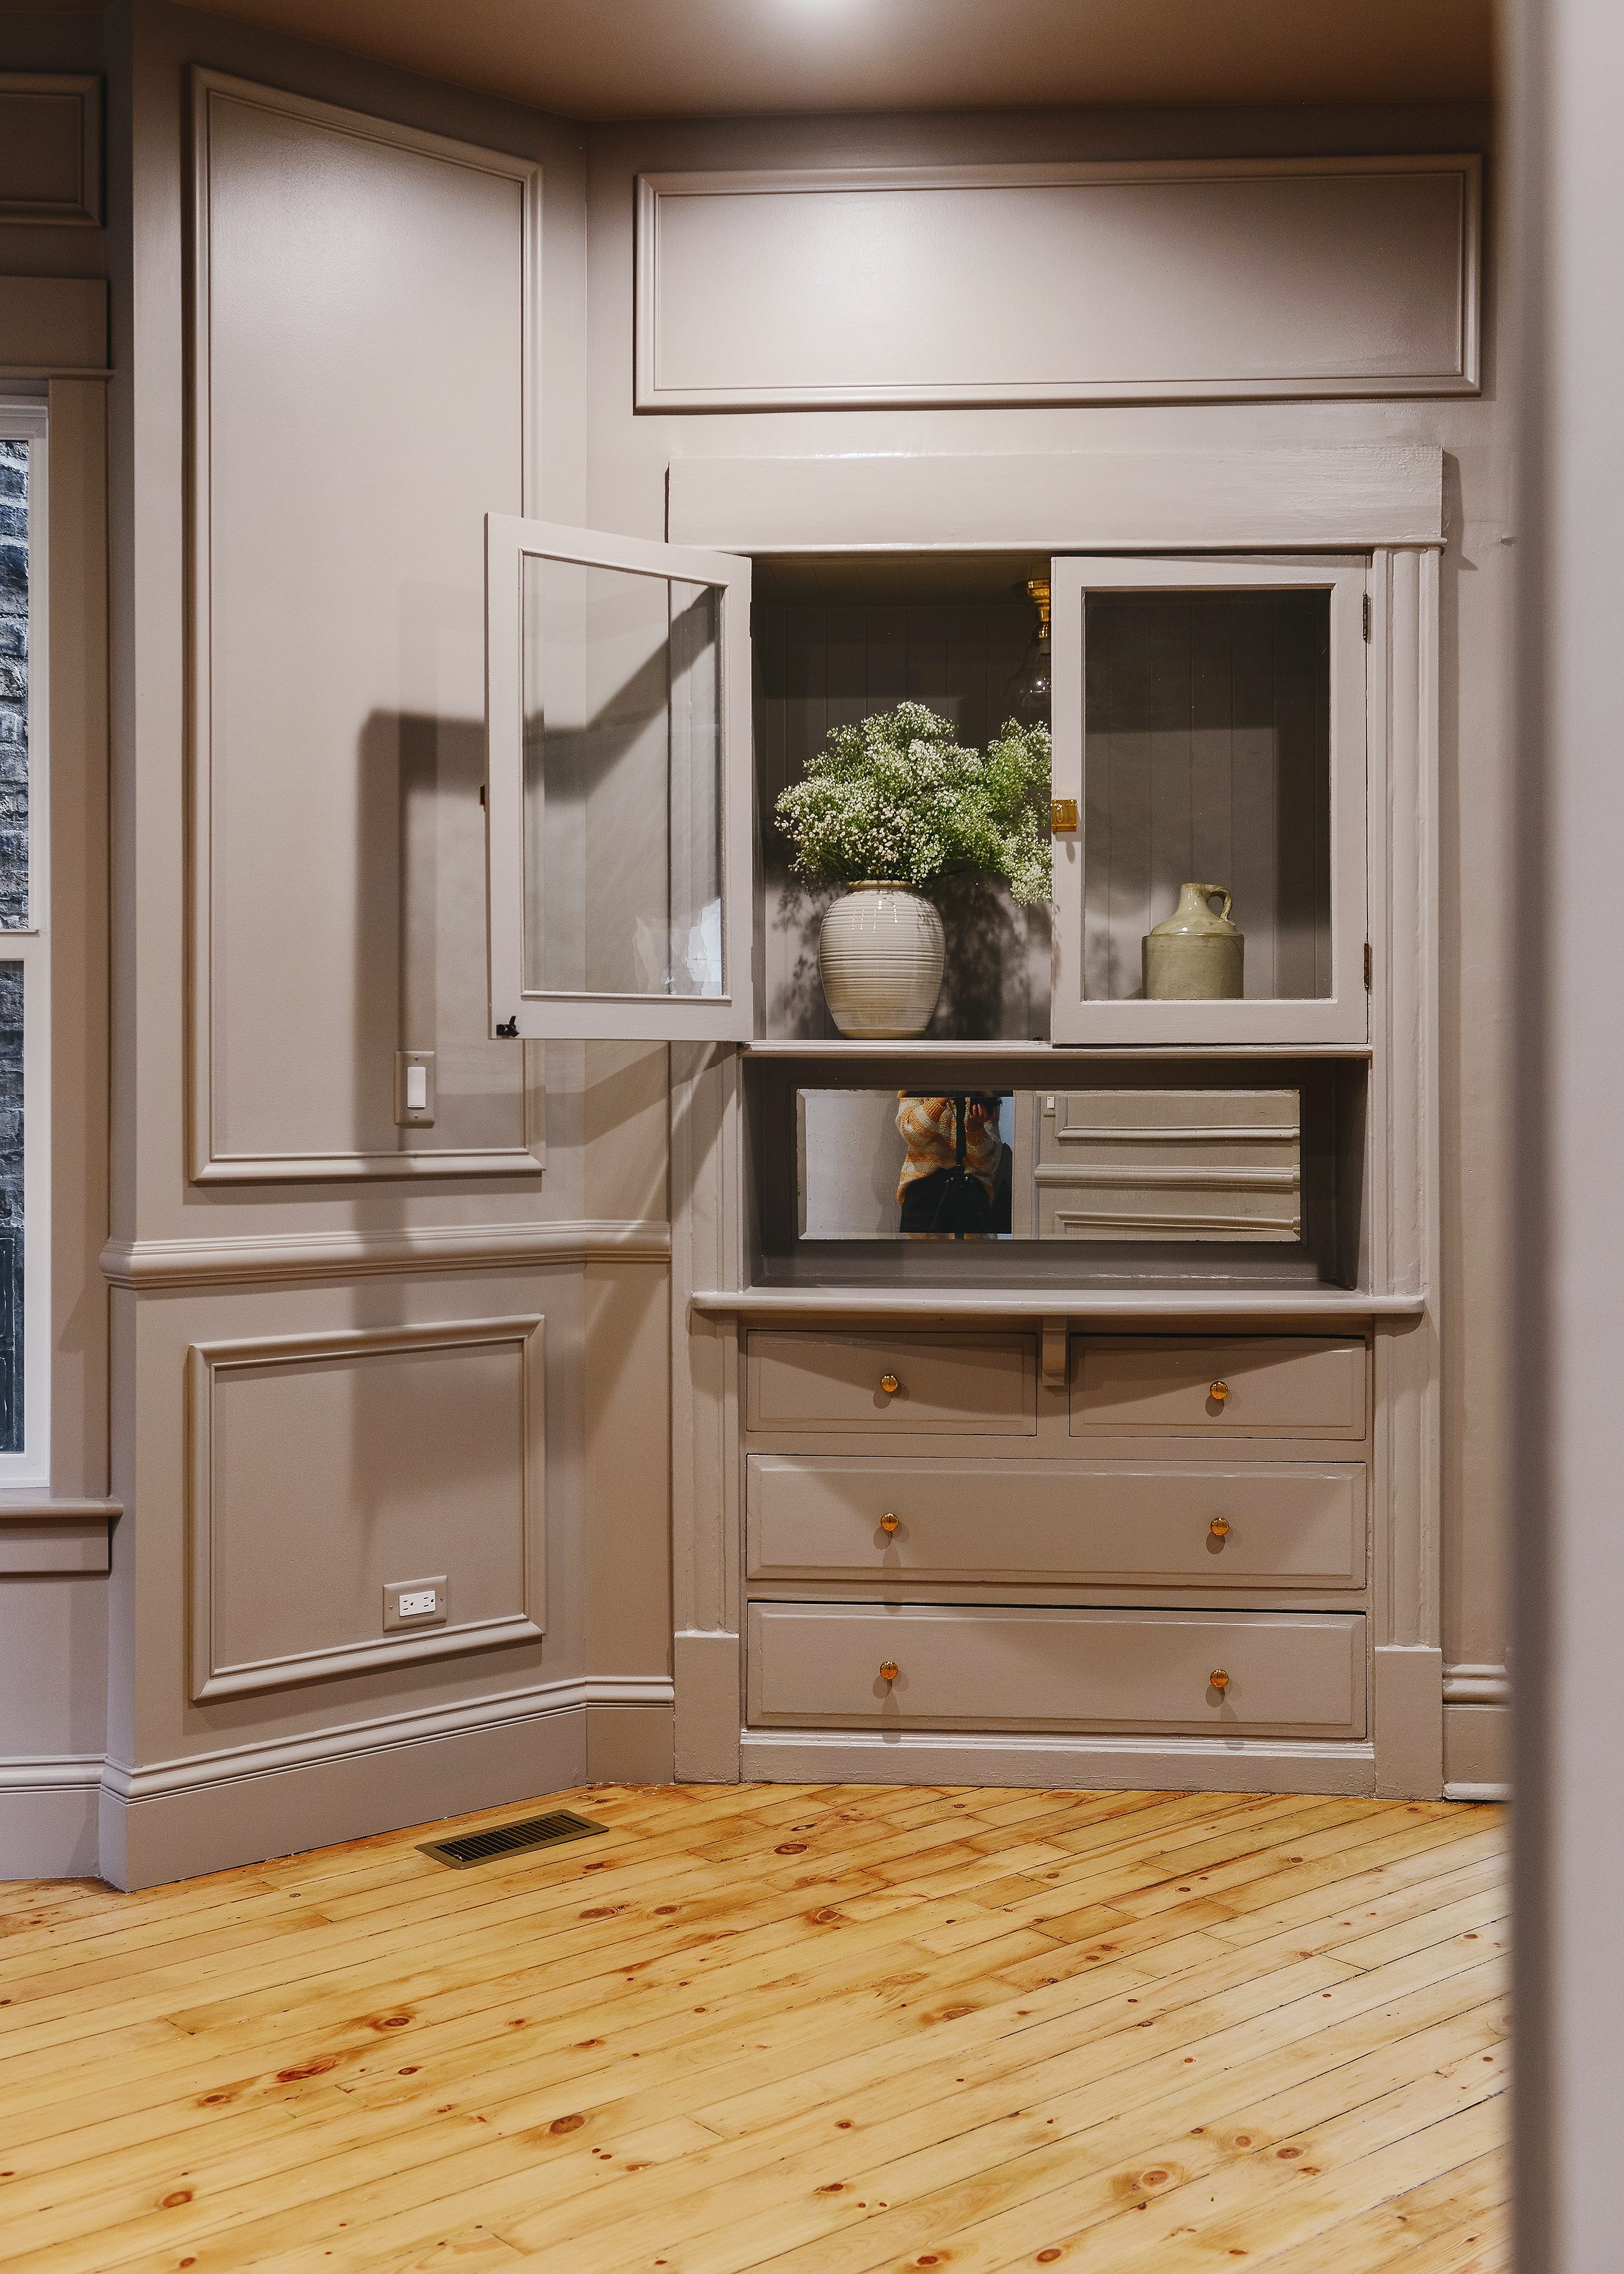 Full view of the vintage built-in hutch that was restored! | via Yellow Brick Home